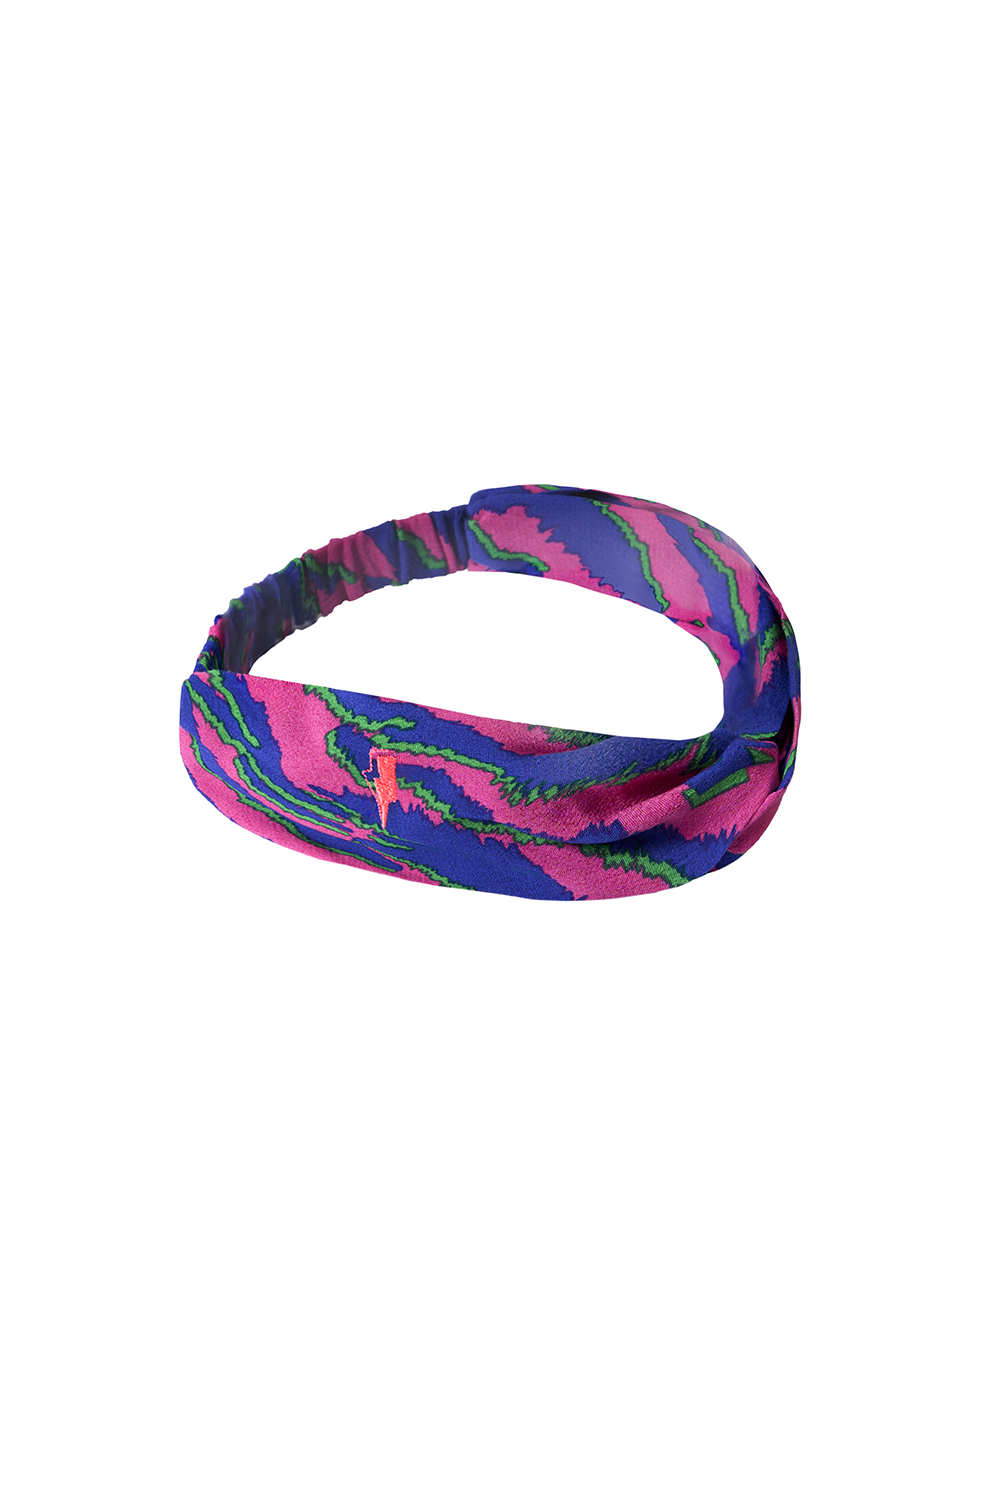 Pink with Blue and Green Shadow Tiger Headband